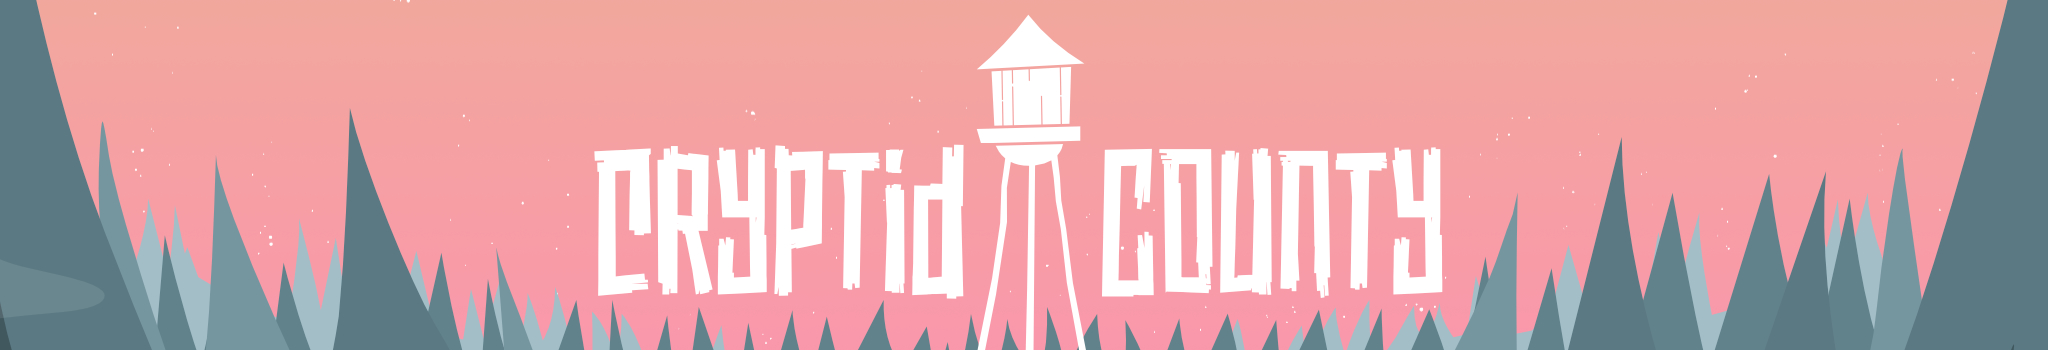 Banner for Cryptid County